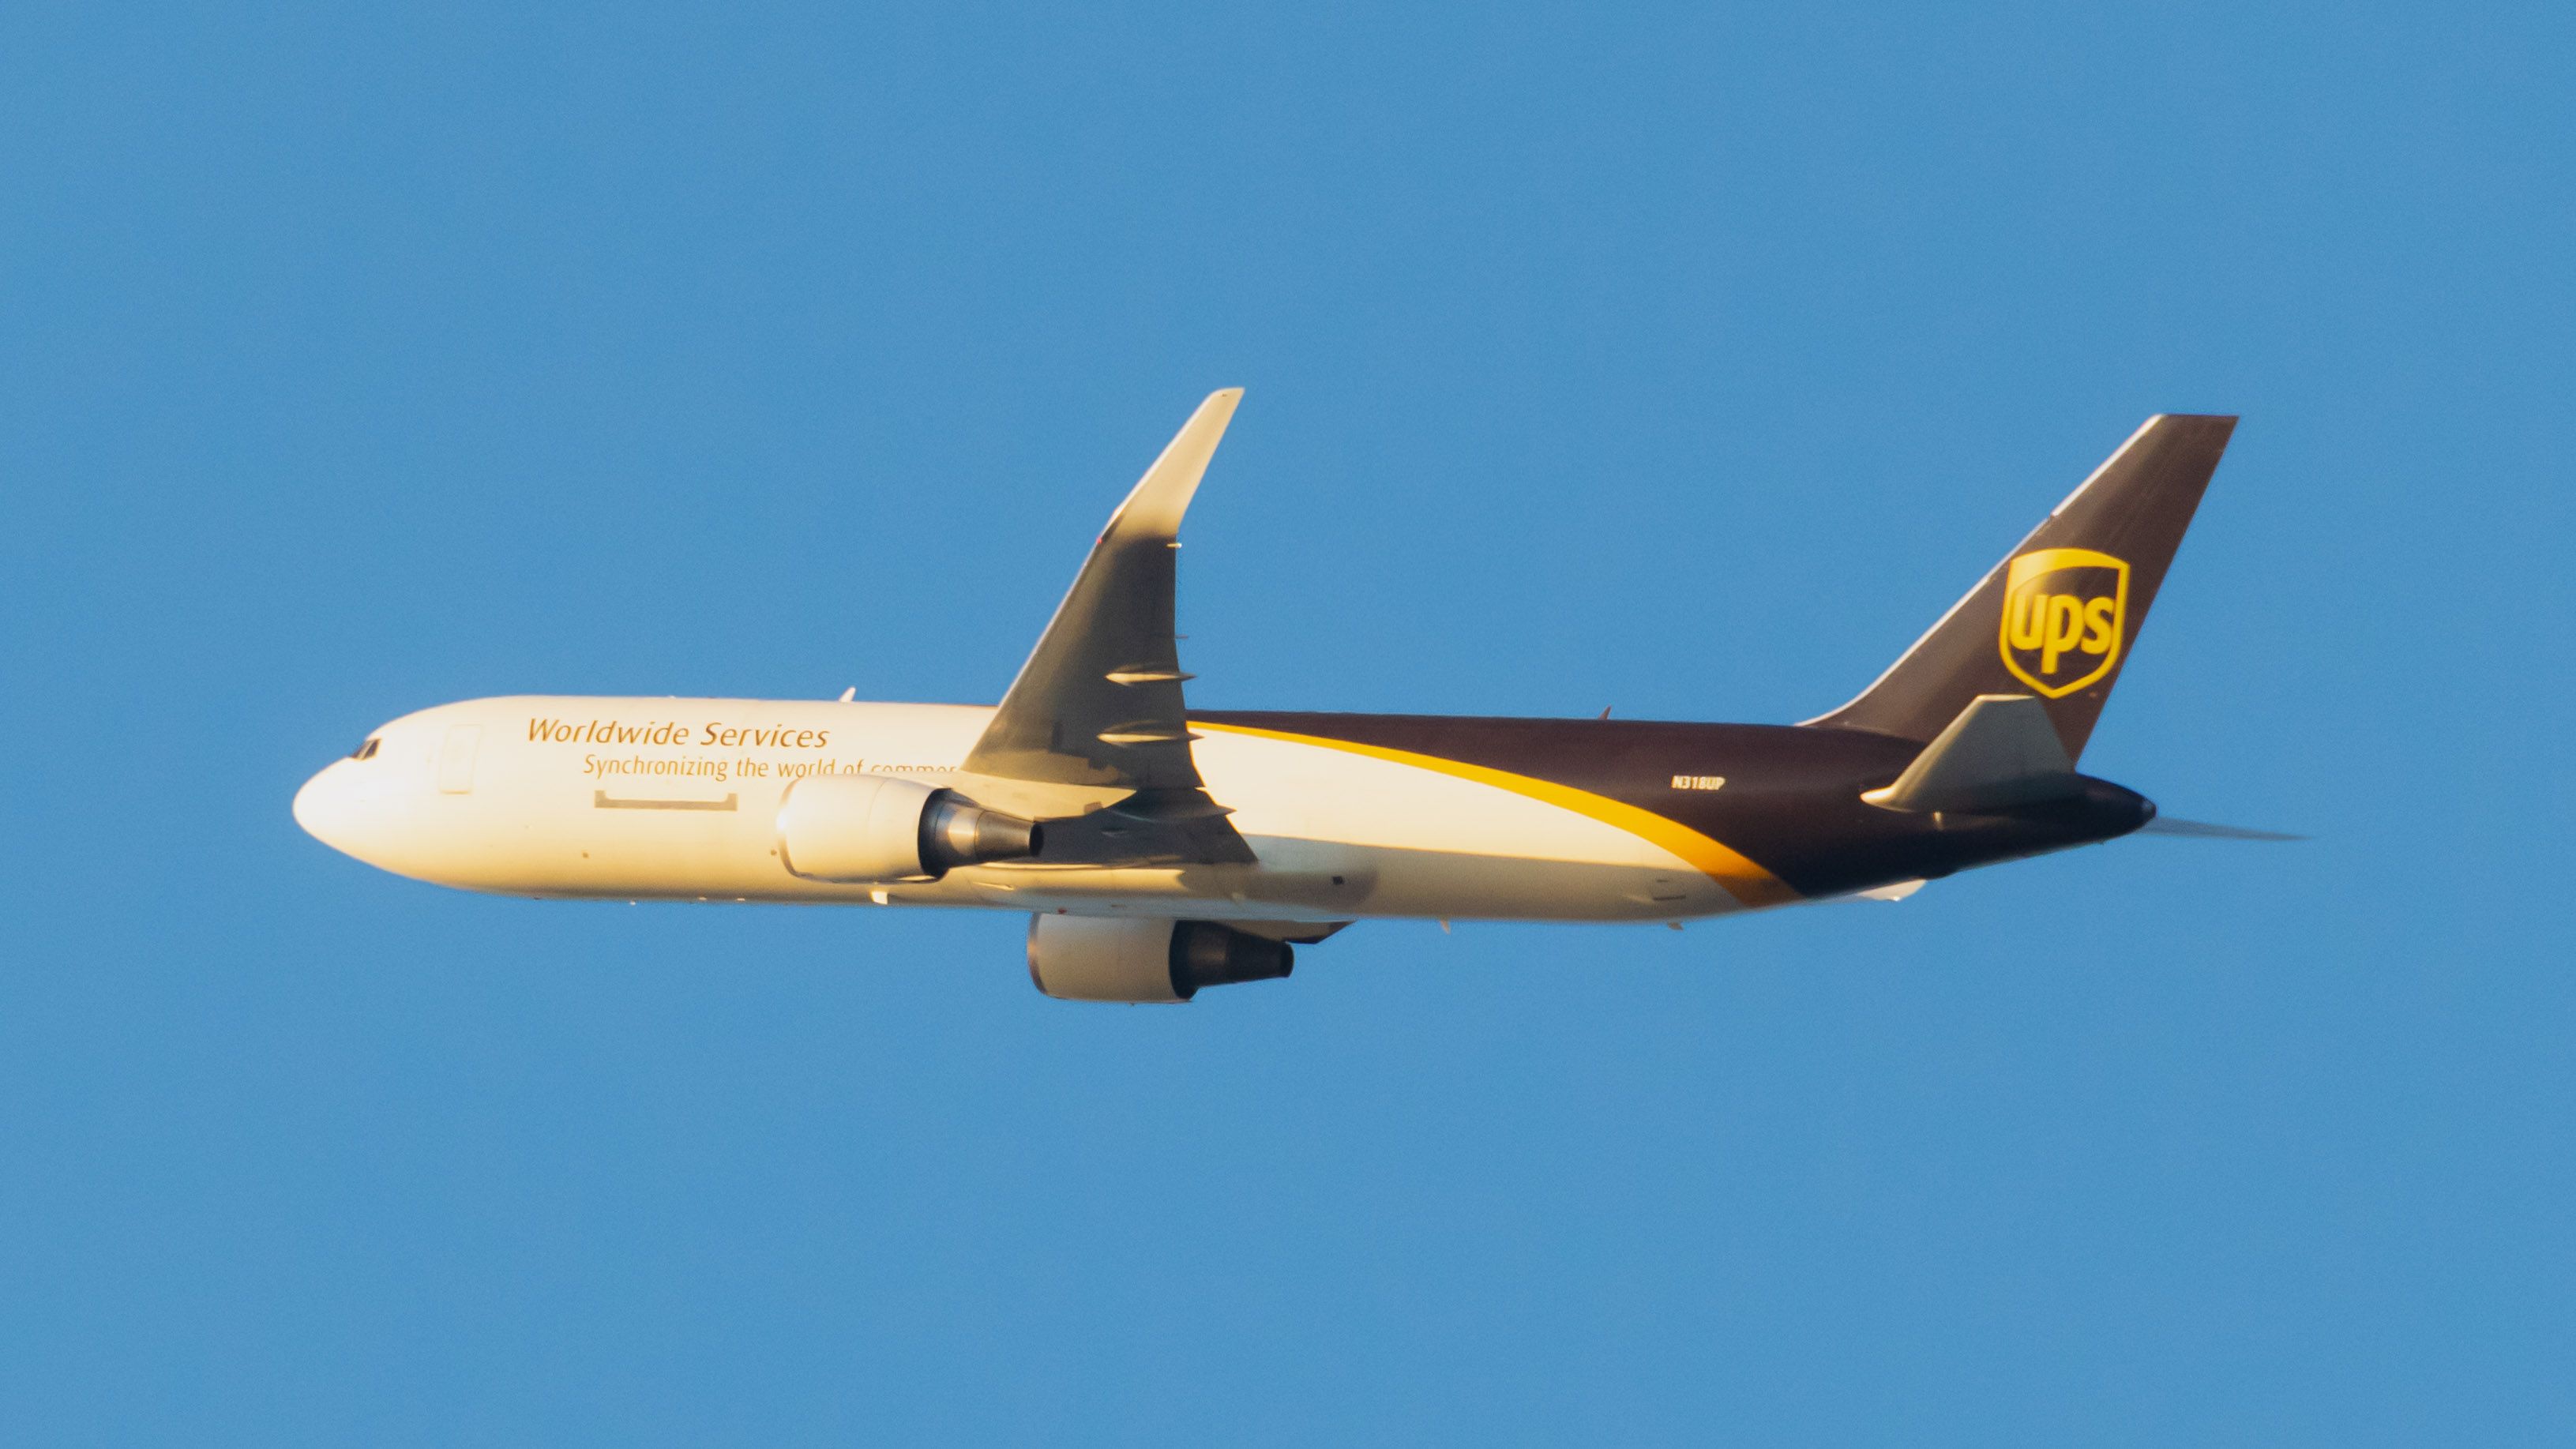 UPS BOEING 767 RISING INTO THE EVENING LIGHT